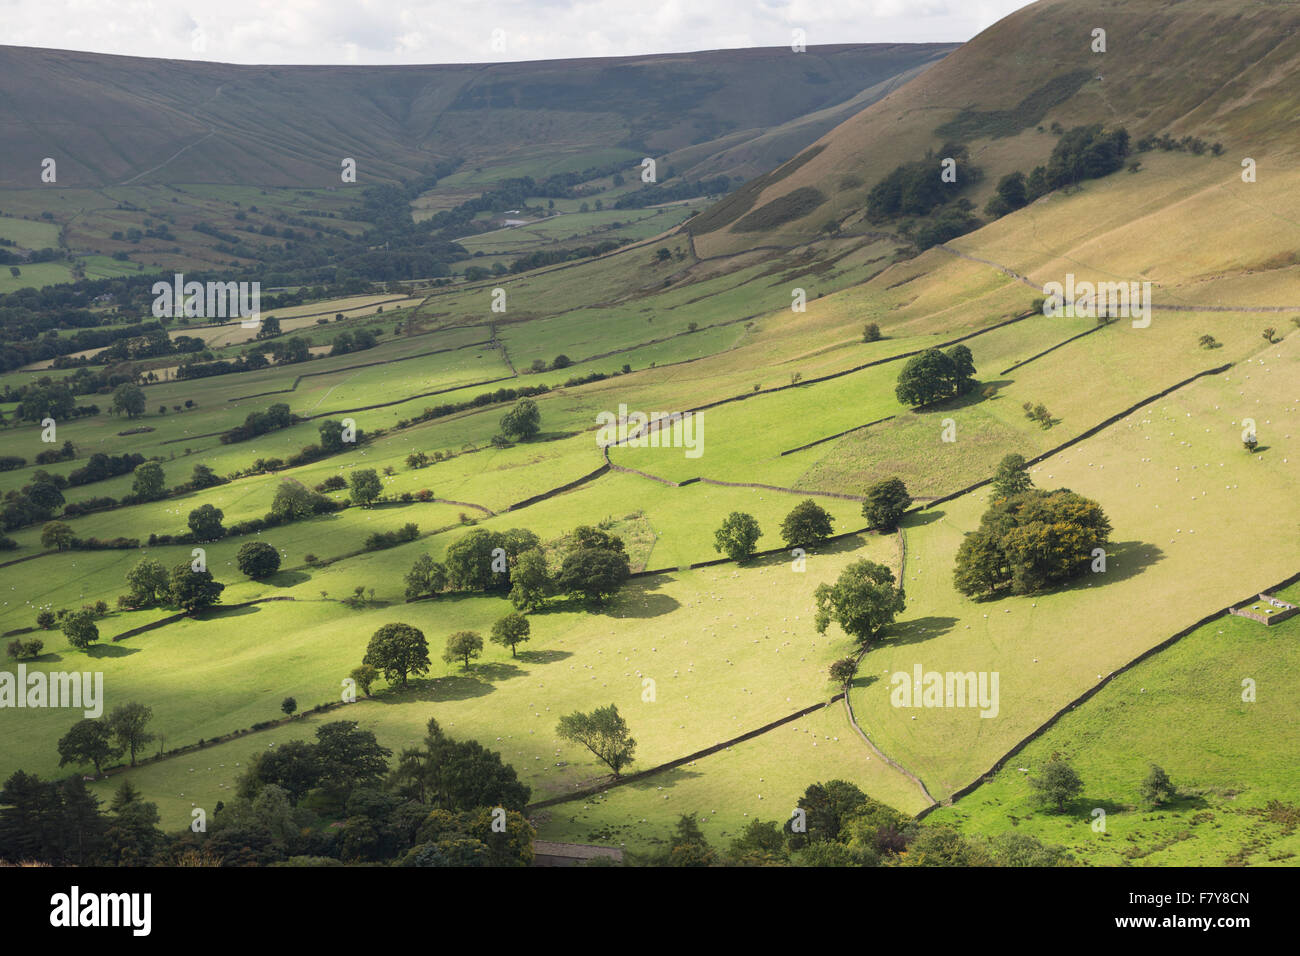 UK, West Yorkshire, view along Kinder Scout looking towards Edale. Stock Photo